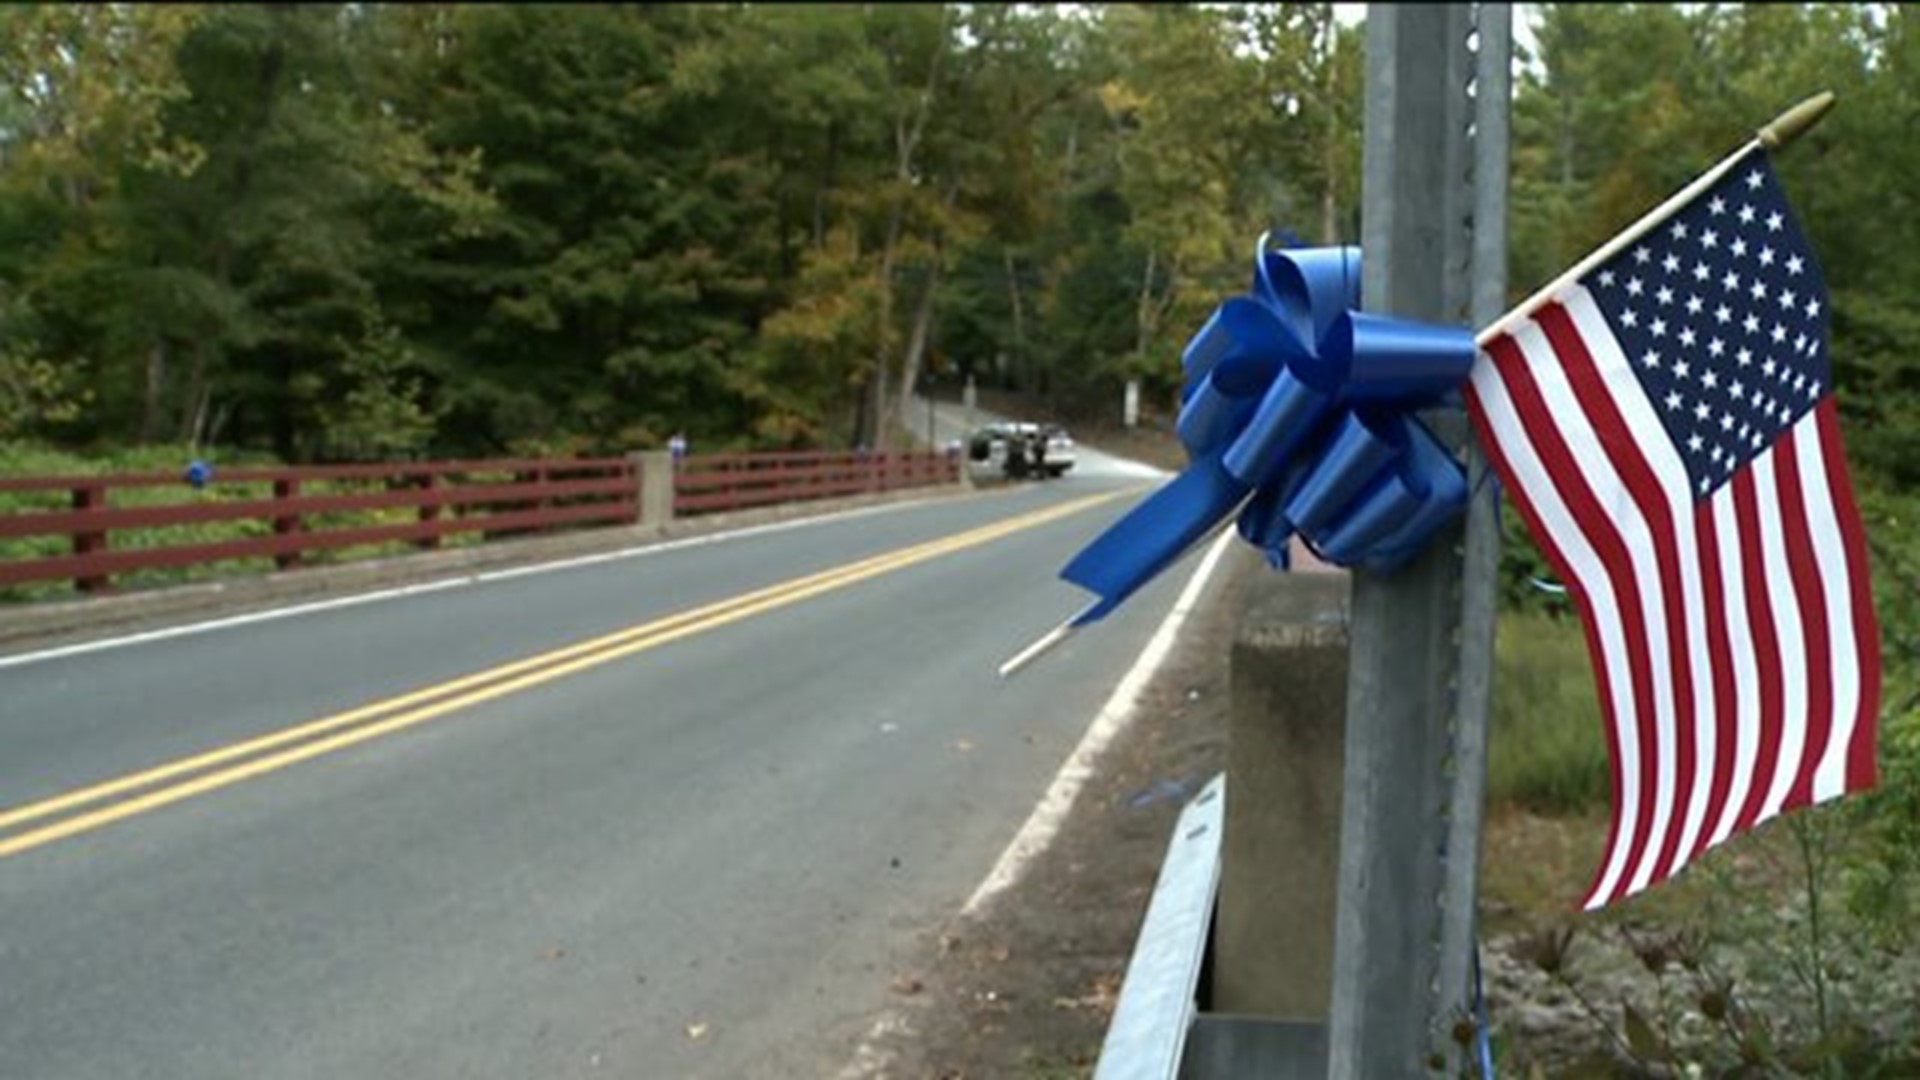 Community Hangs Blue Ribbons To Show Support To Men In Blue